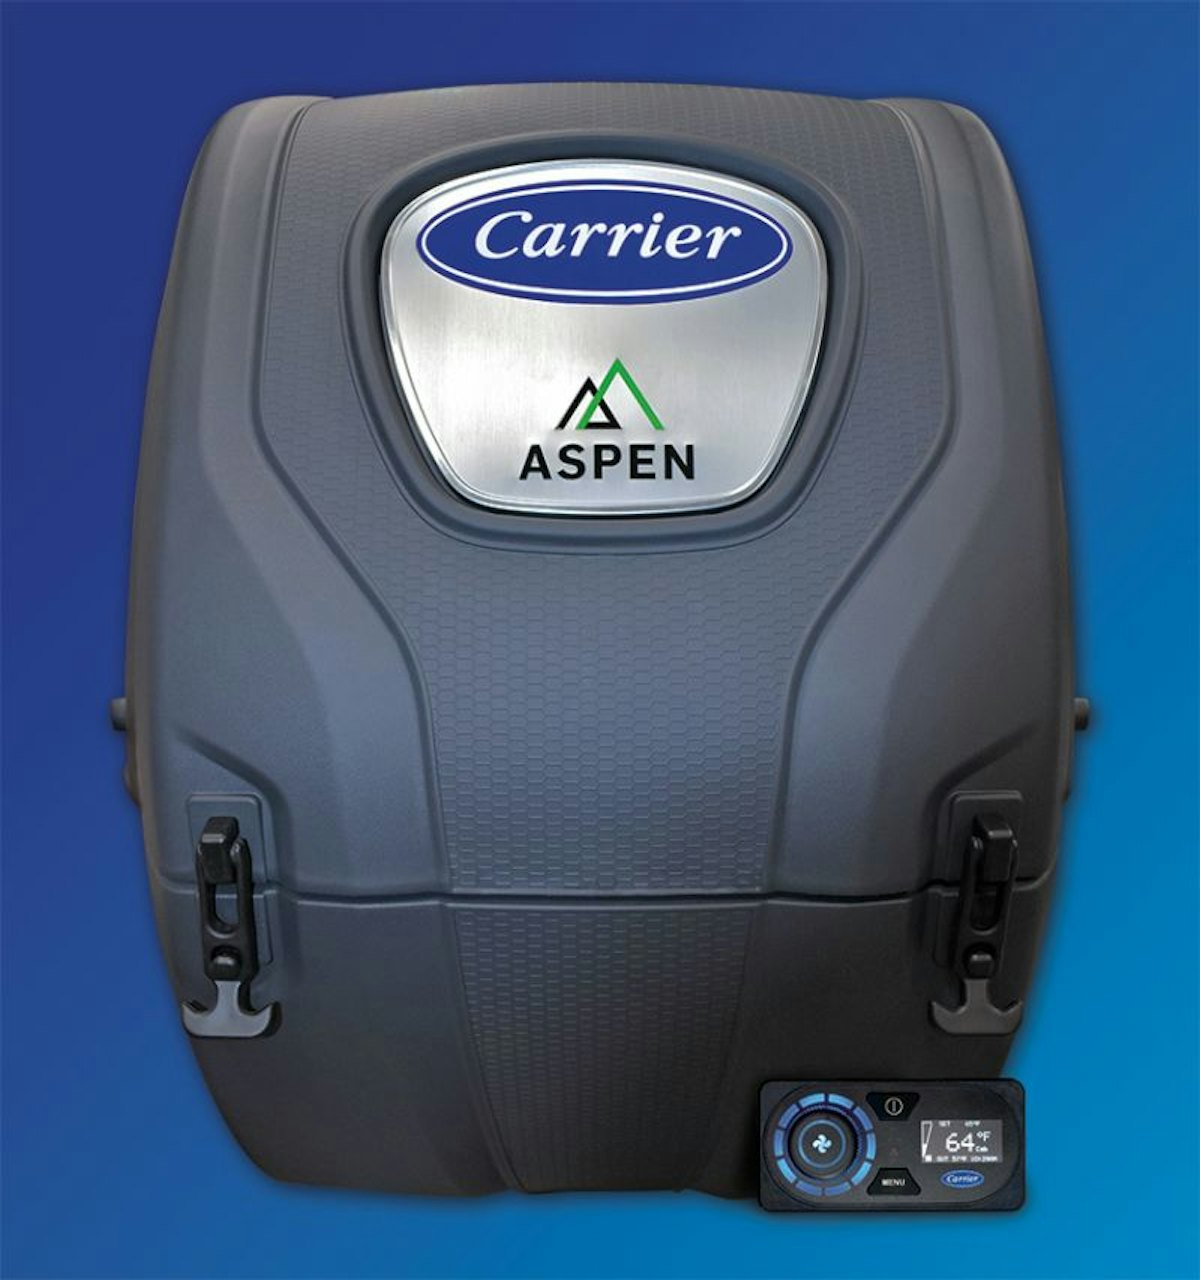 Carrier Transicold introduces new Aspen diesel auxiliary power unit